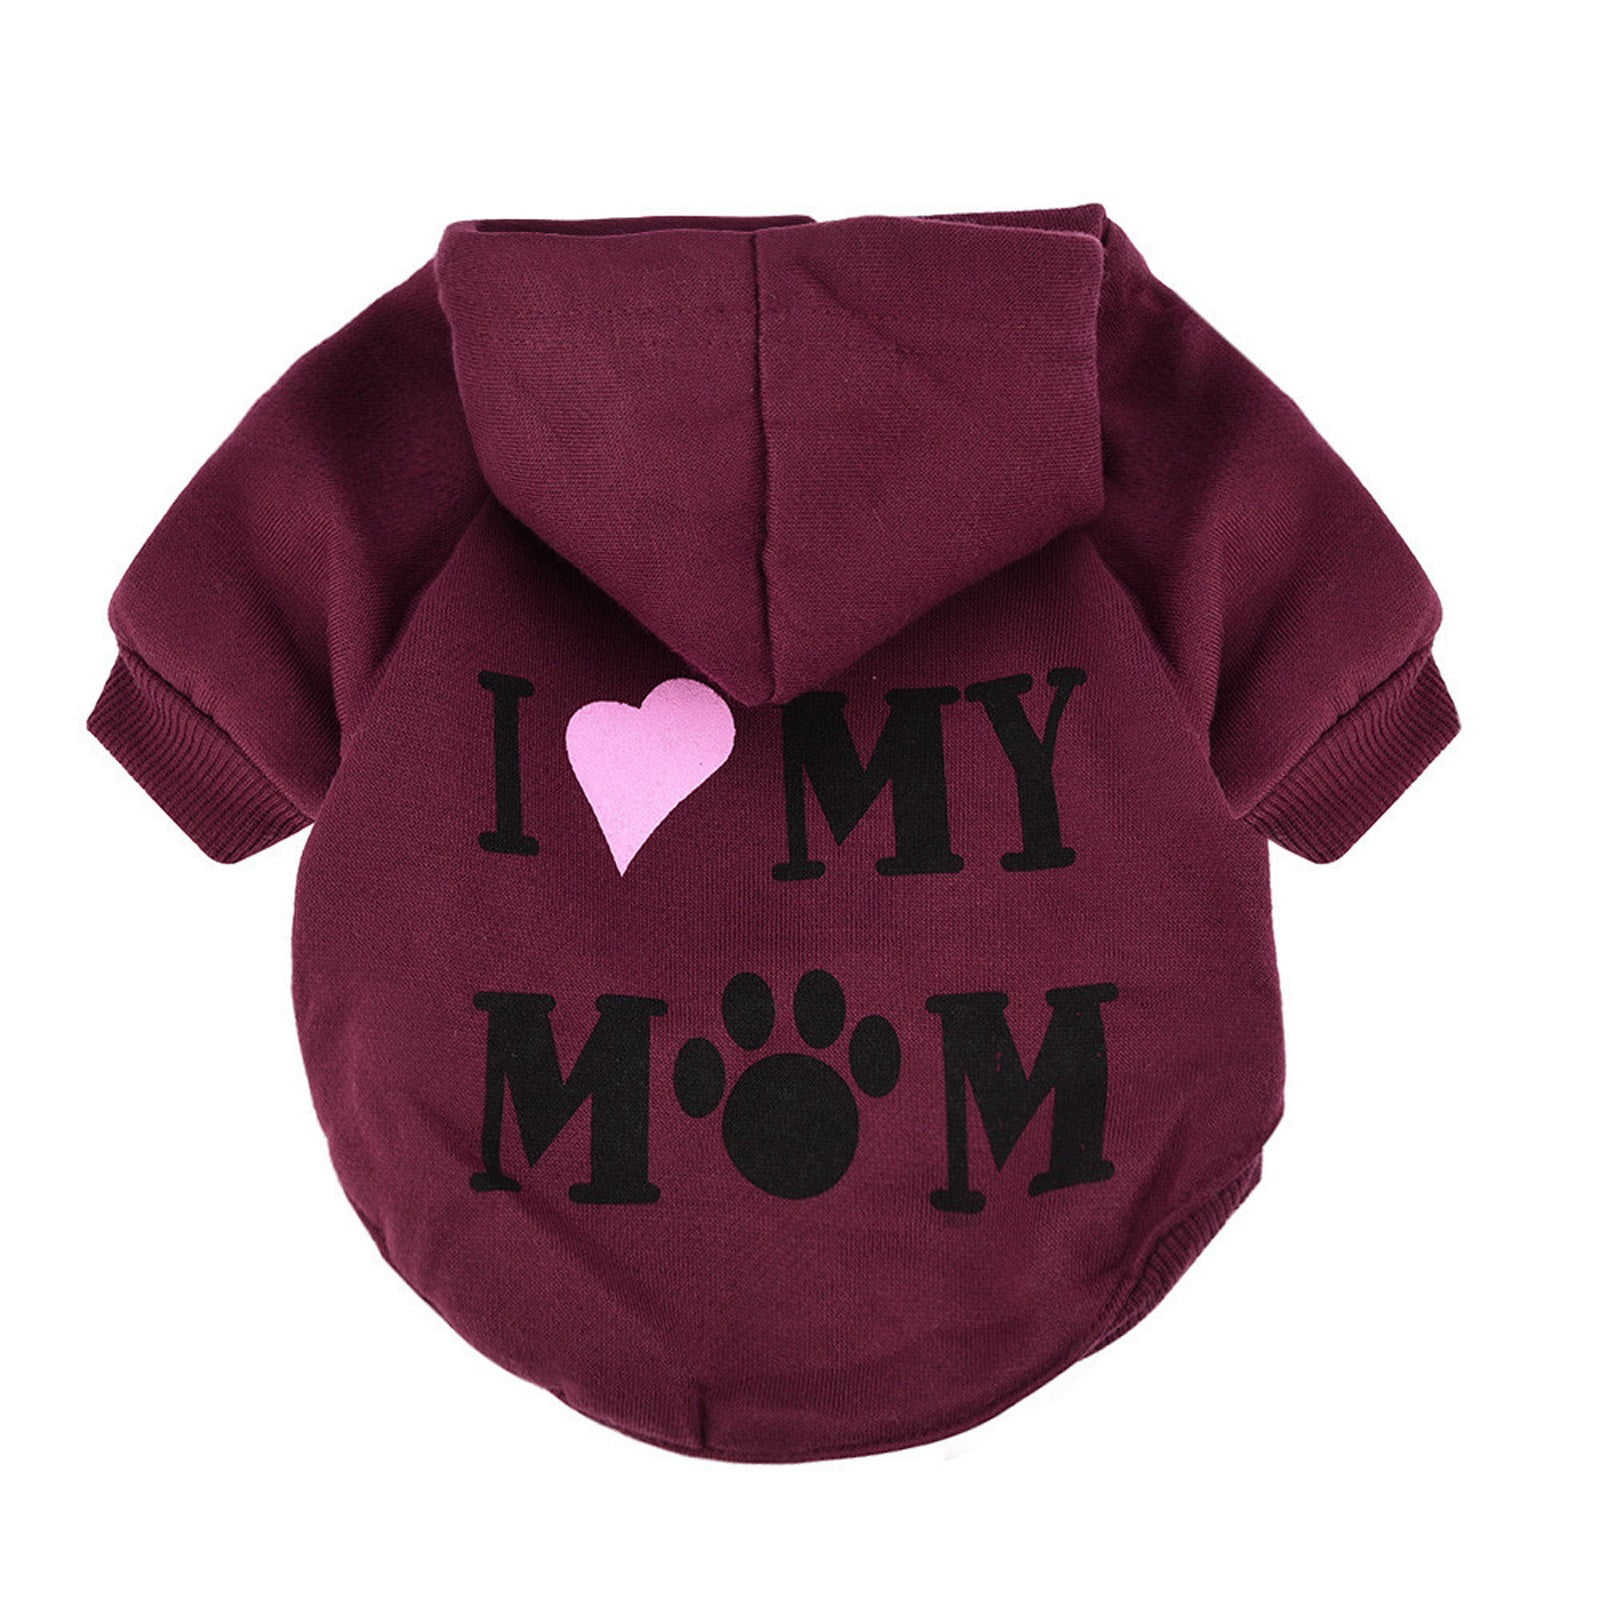 Banstore Dog Clothing Puppy T-Shirt Puppy Pet Fashion Costume for Small Dog